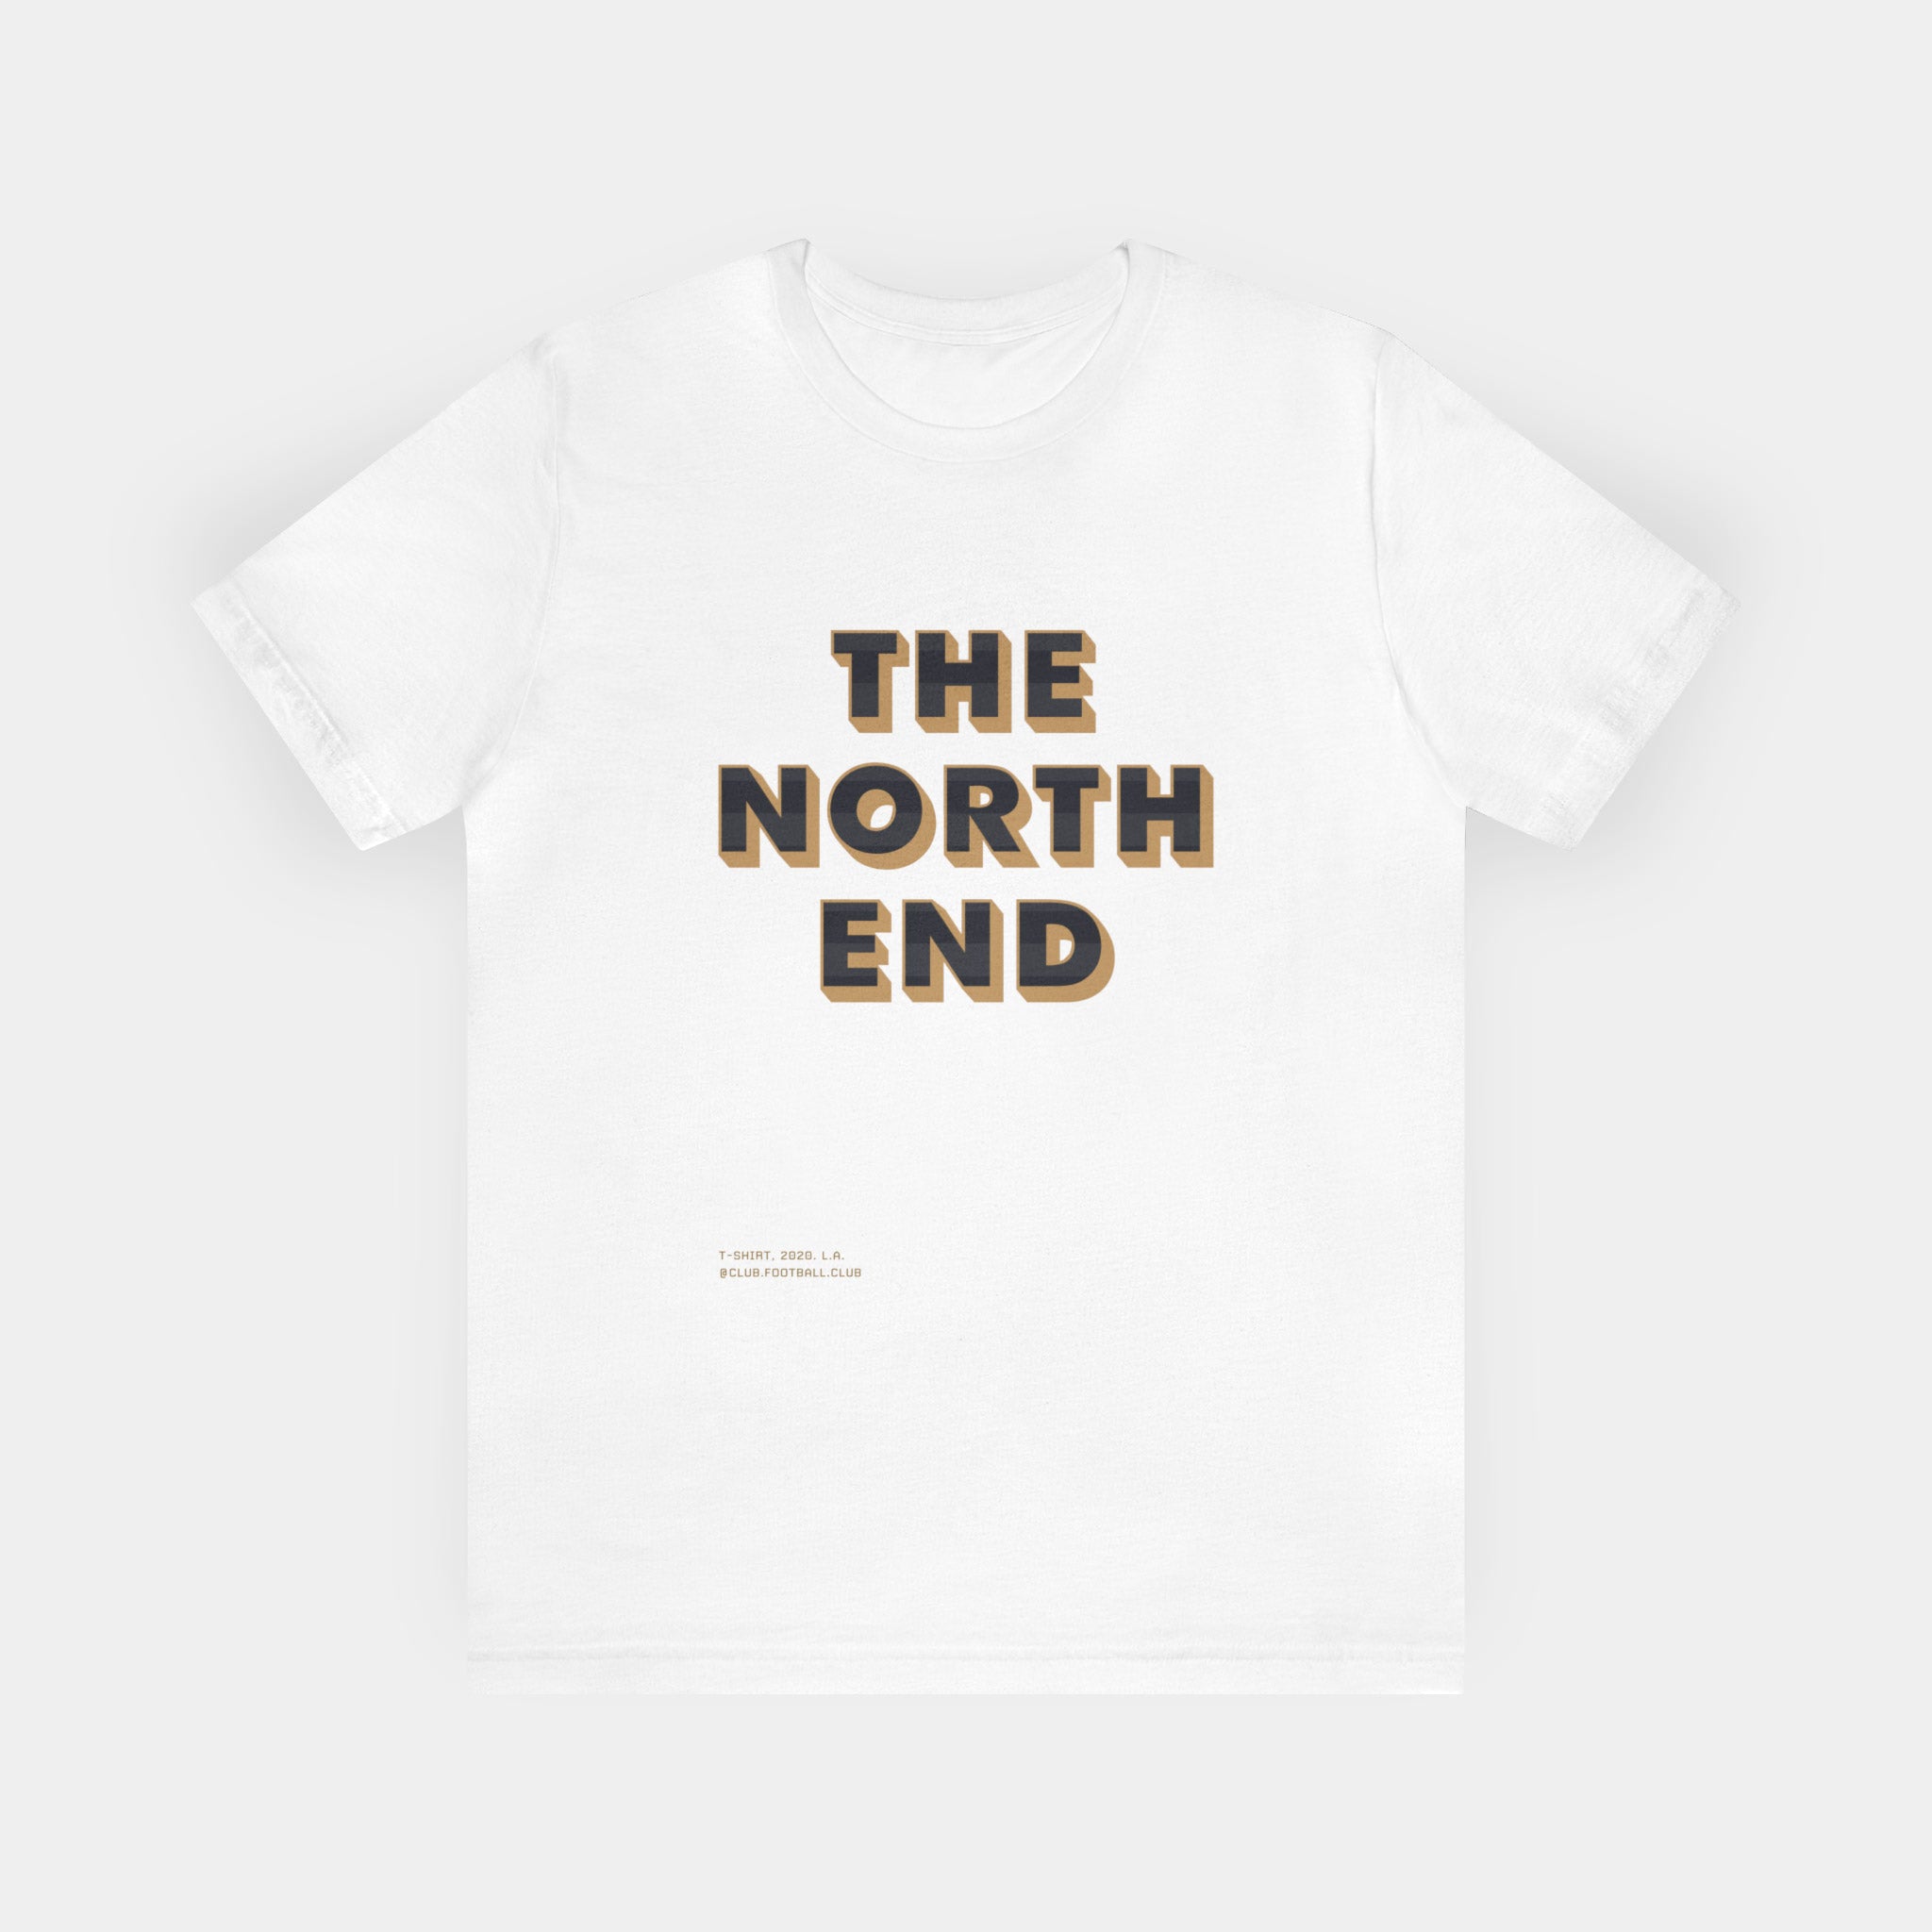 The North End, Home of the 3252 (LAFC) T-shirt